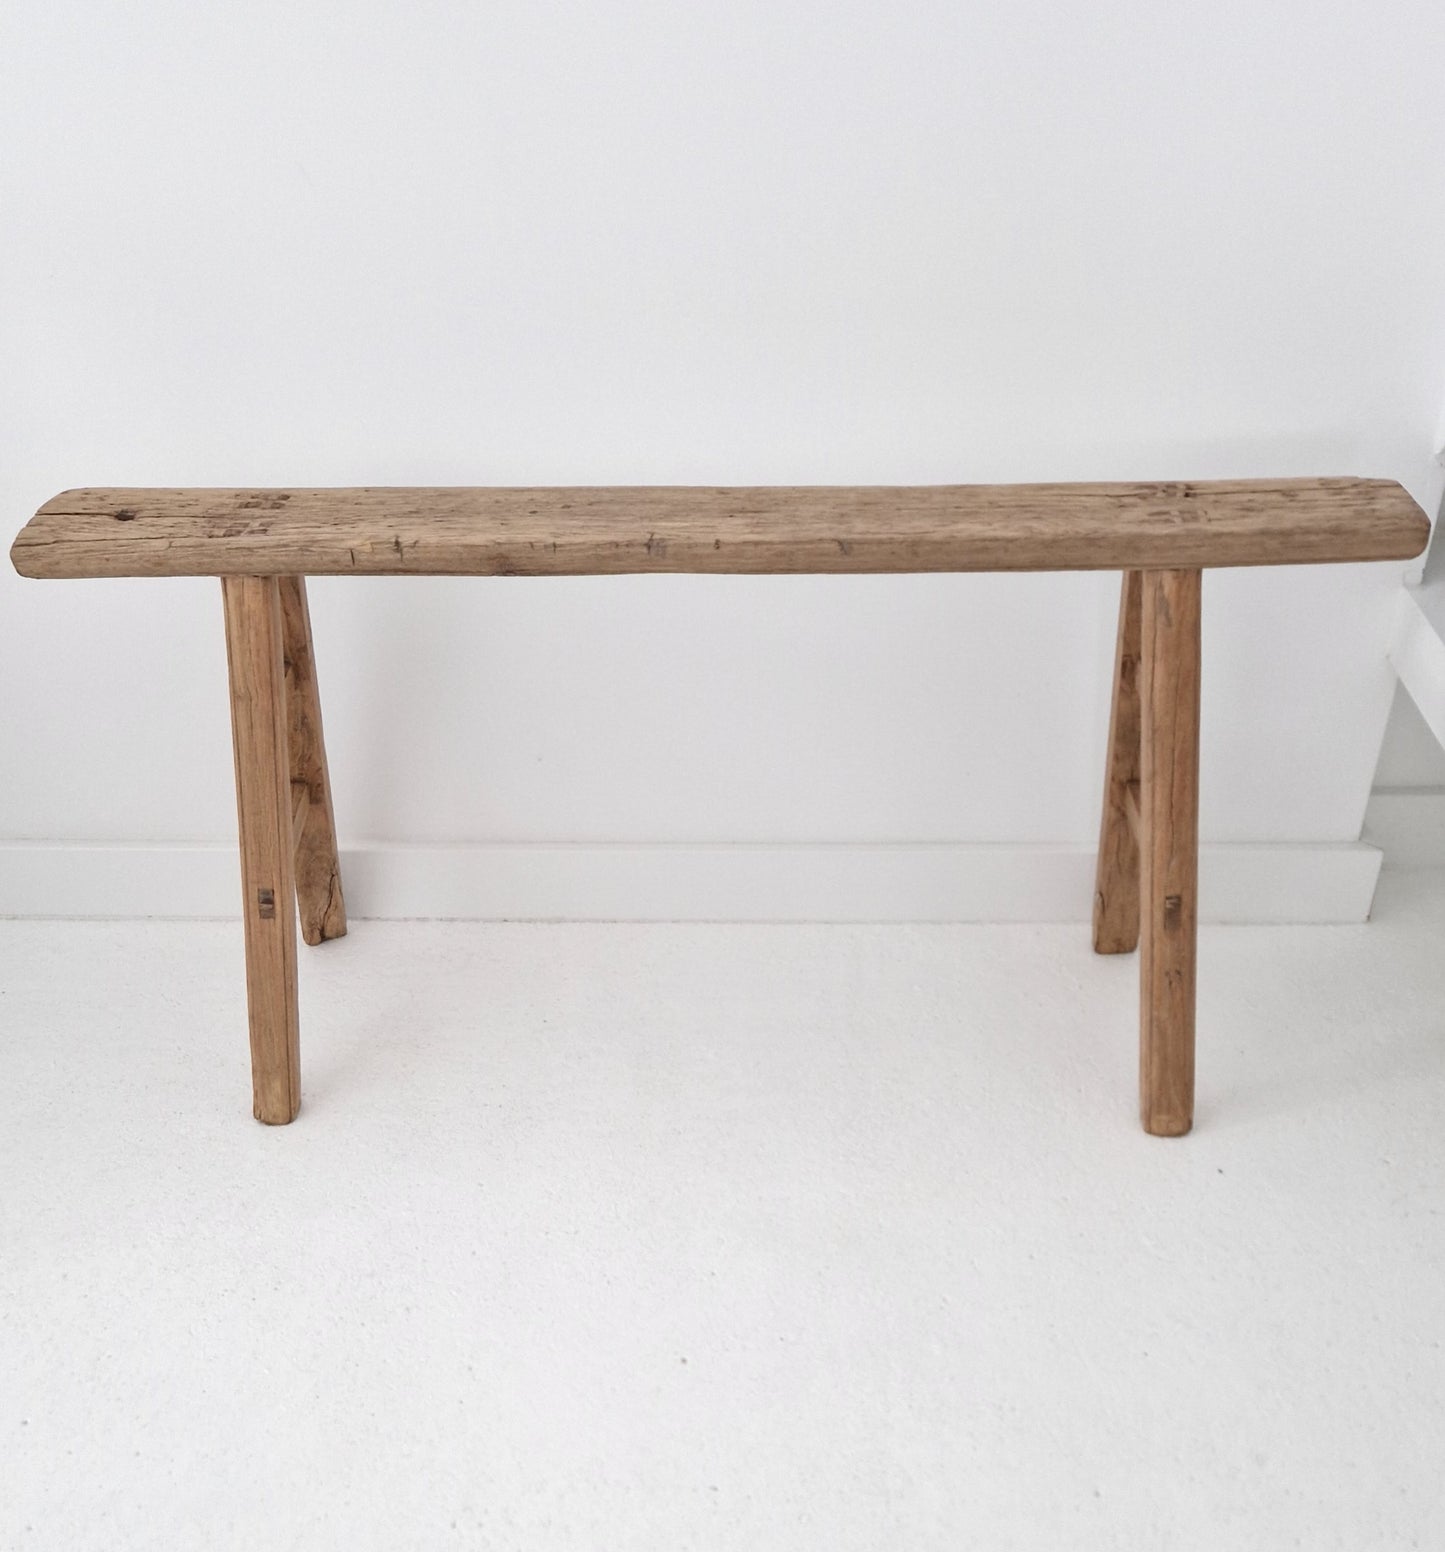 Old wooden bench #4 (112,5cm)